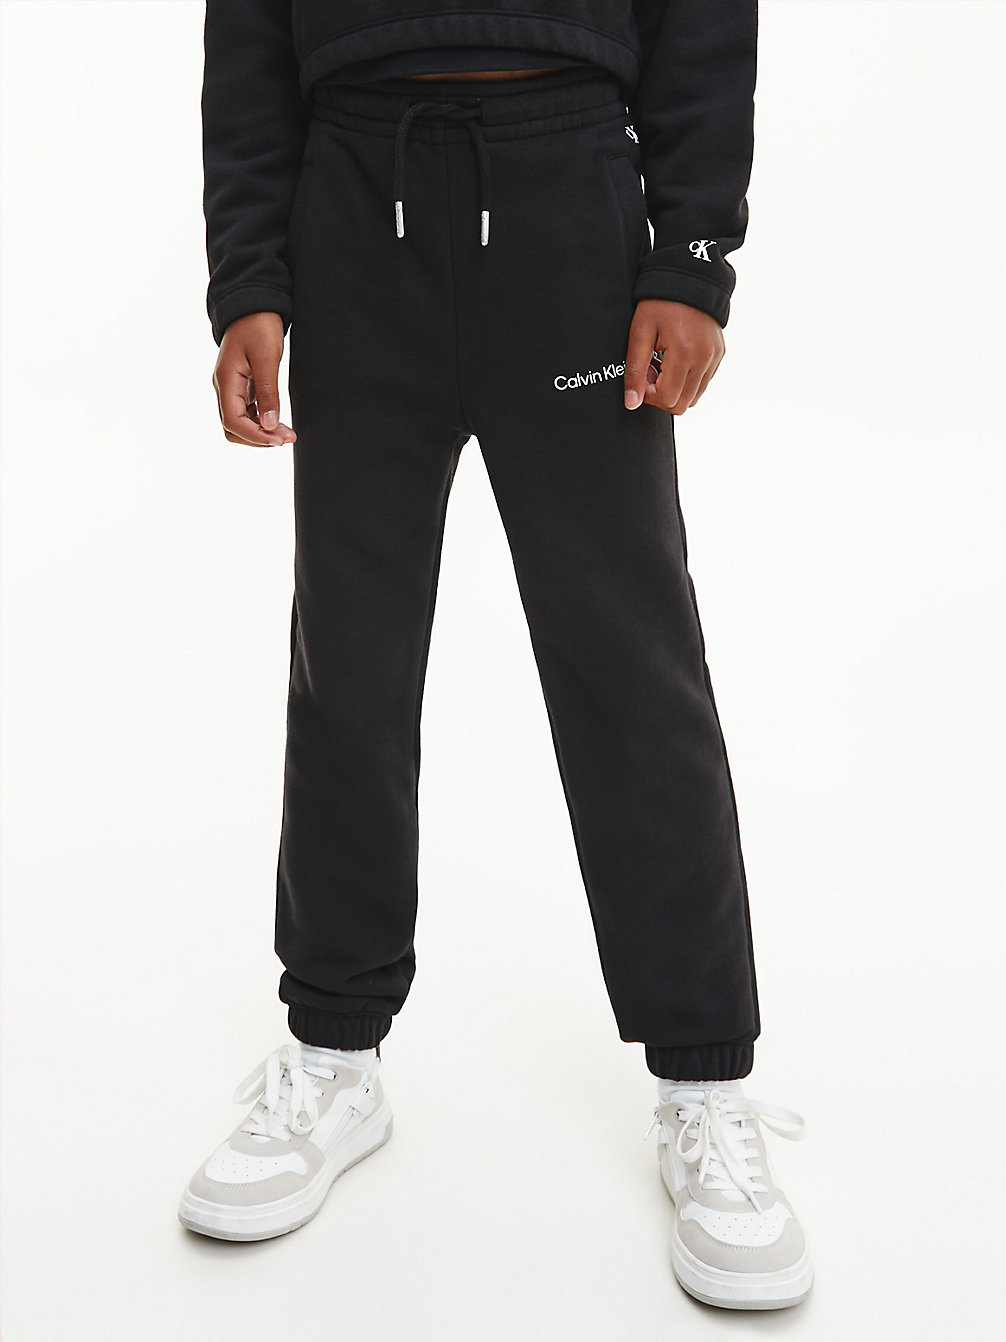 CK BLACK Relaxed Organic Cotton Joggers undefined girls Calvin Klein